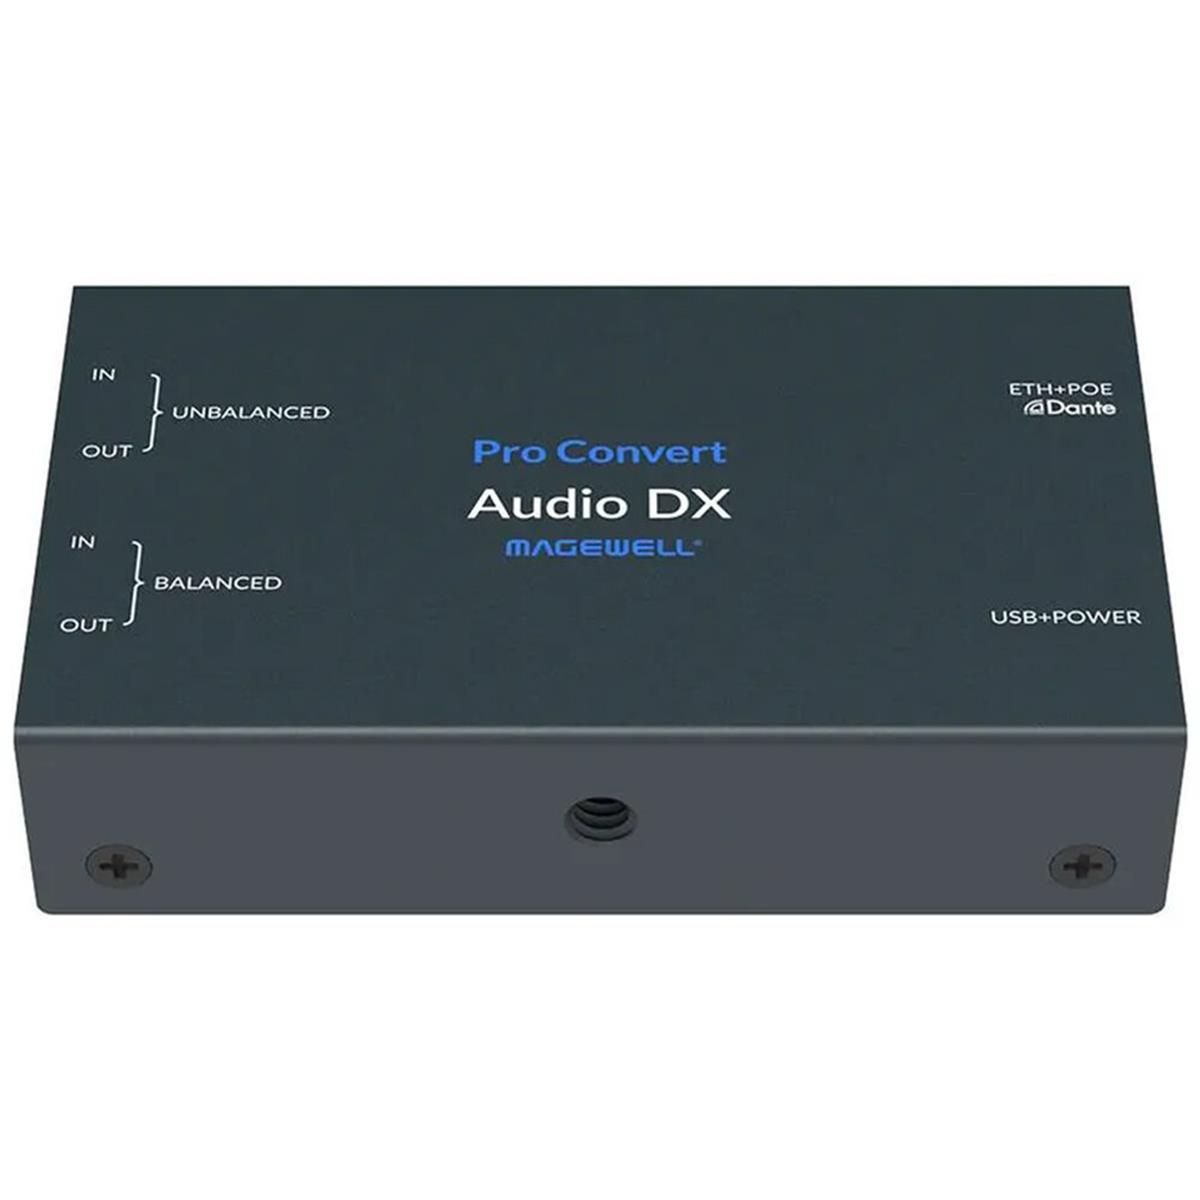 Image of Magewell Pro Convert Audio DX Multi-Format IP Audio Capture and Converter